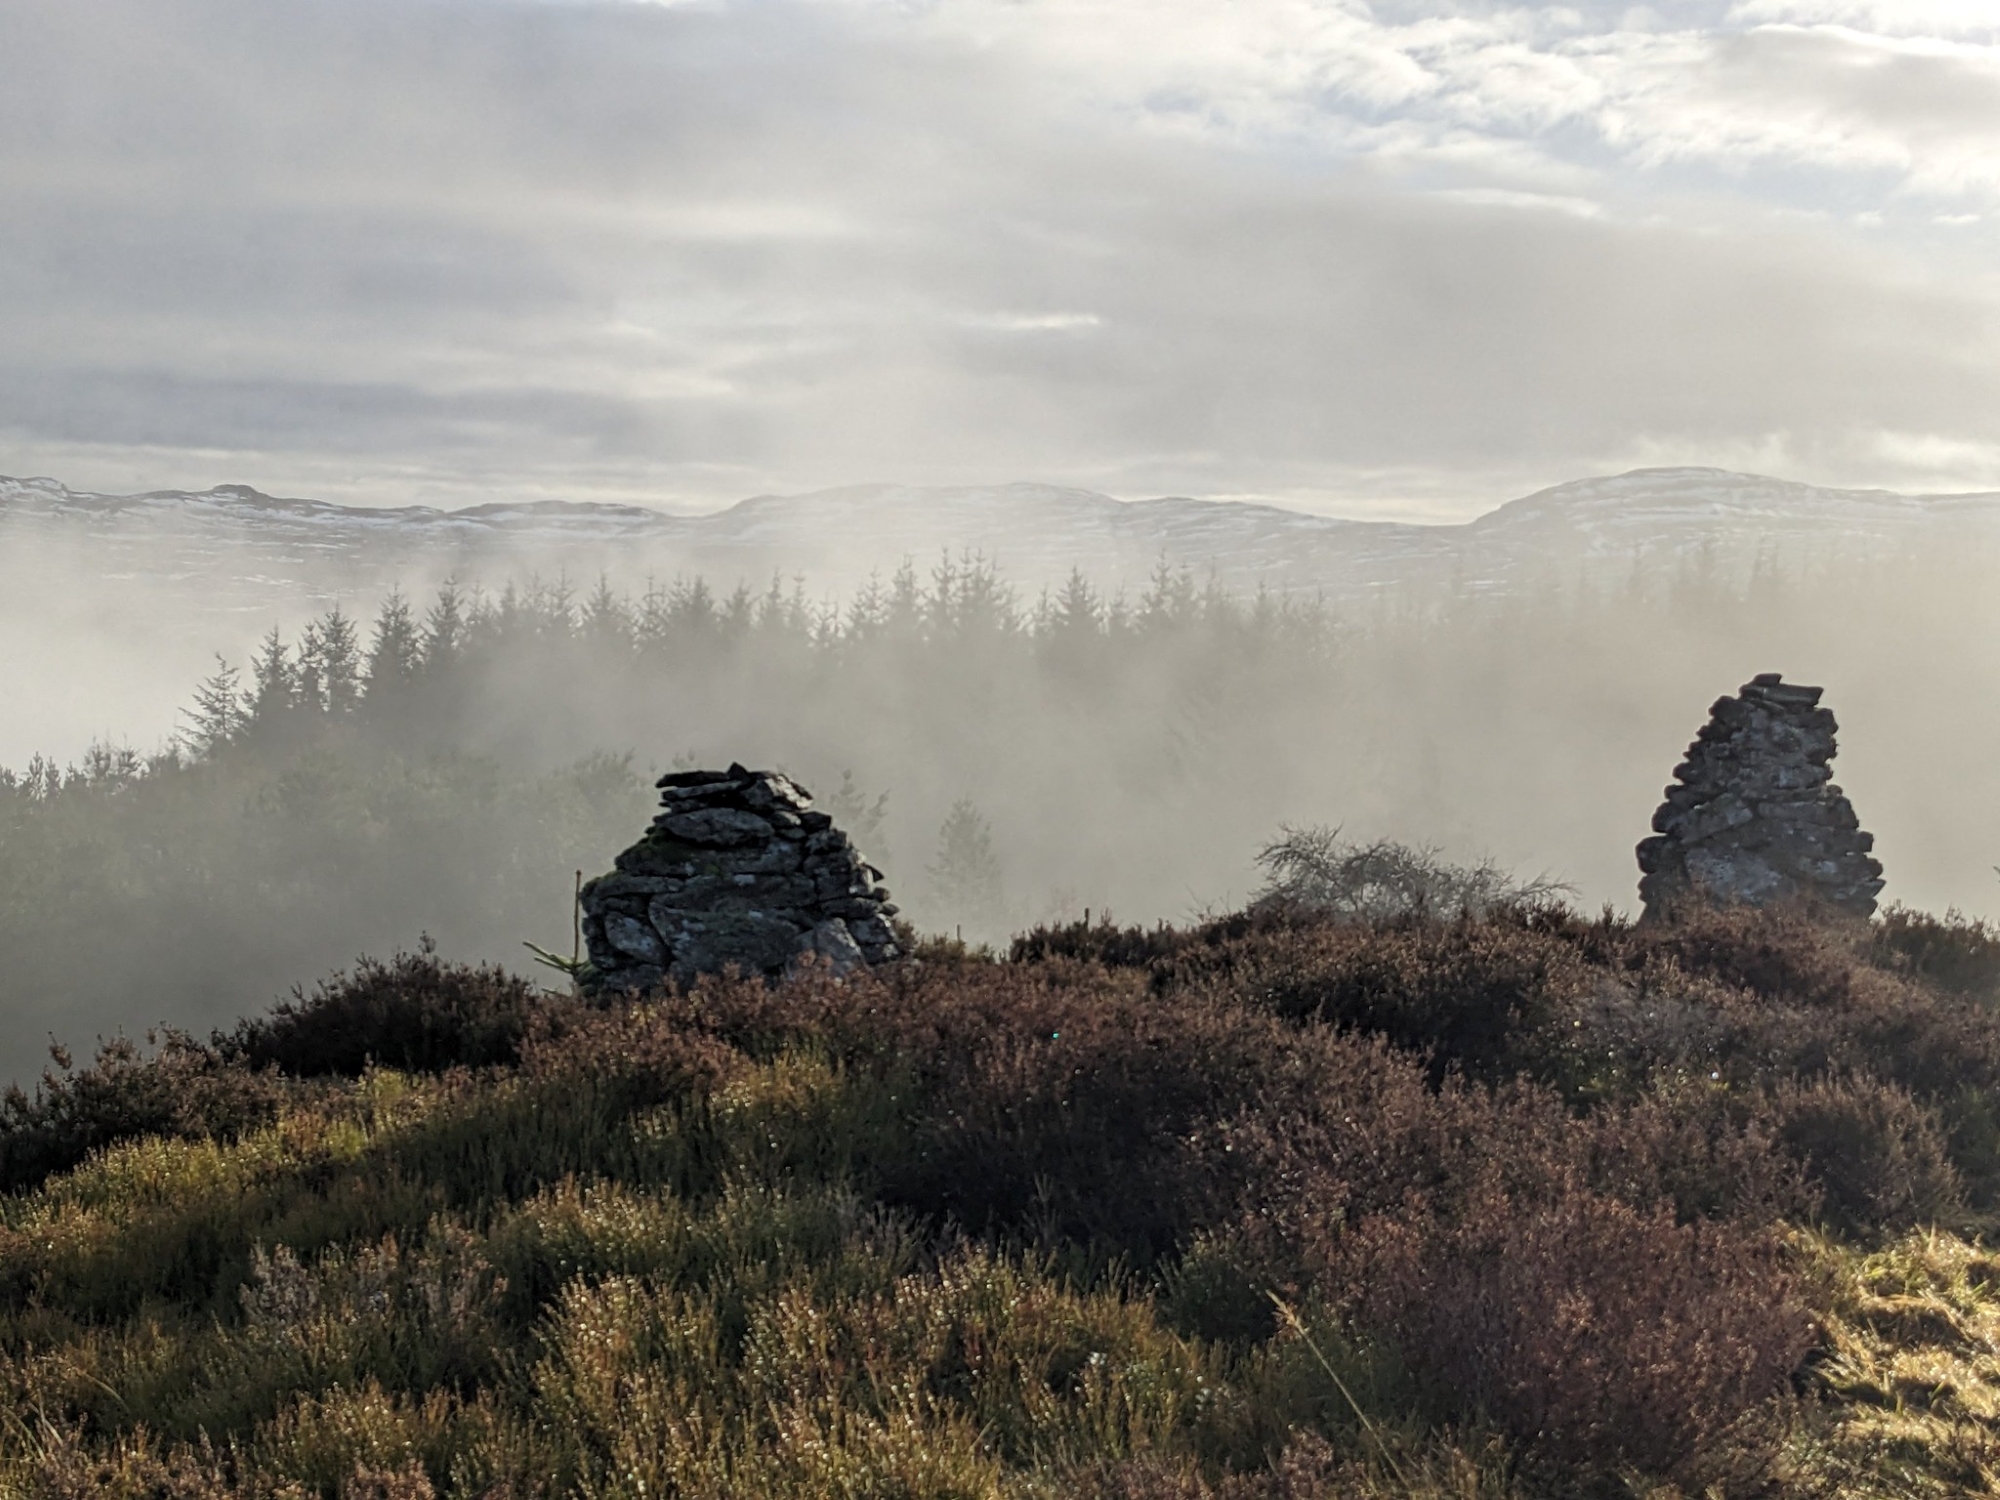 Hilltop cairns in rural Perthshire